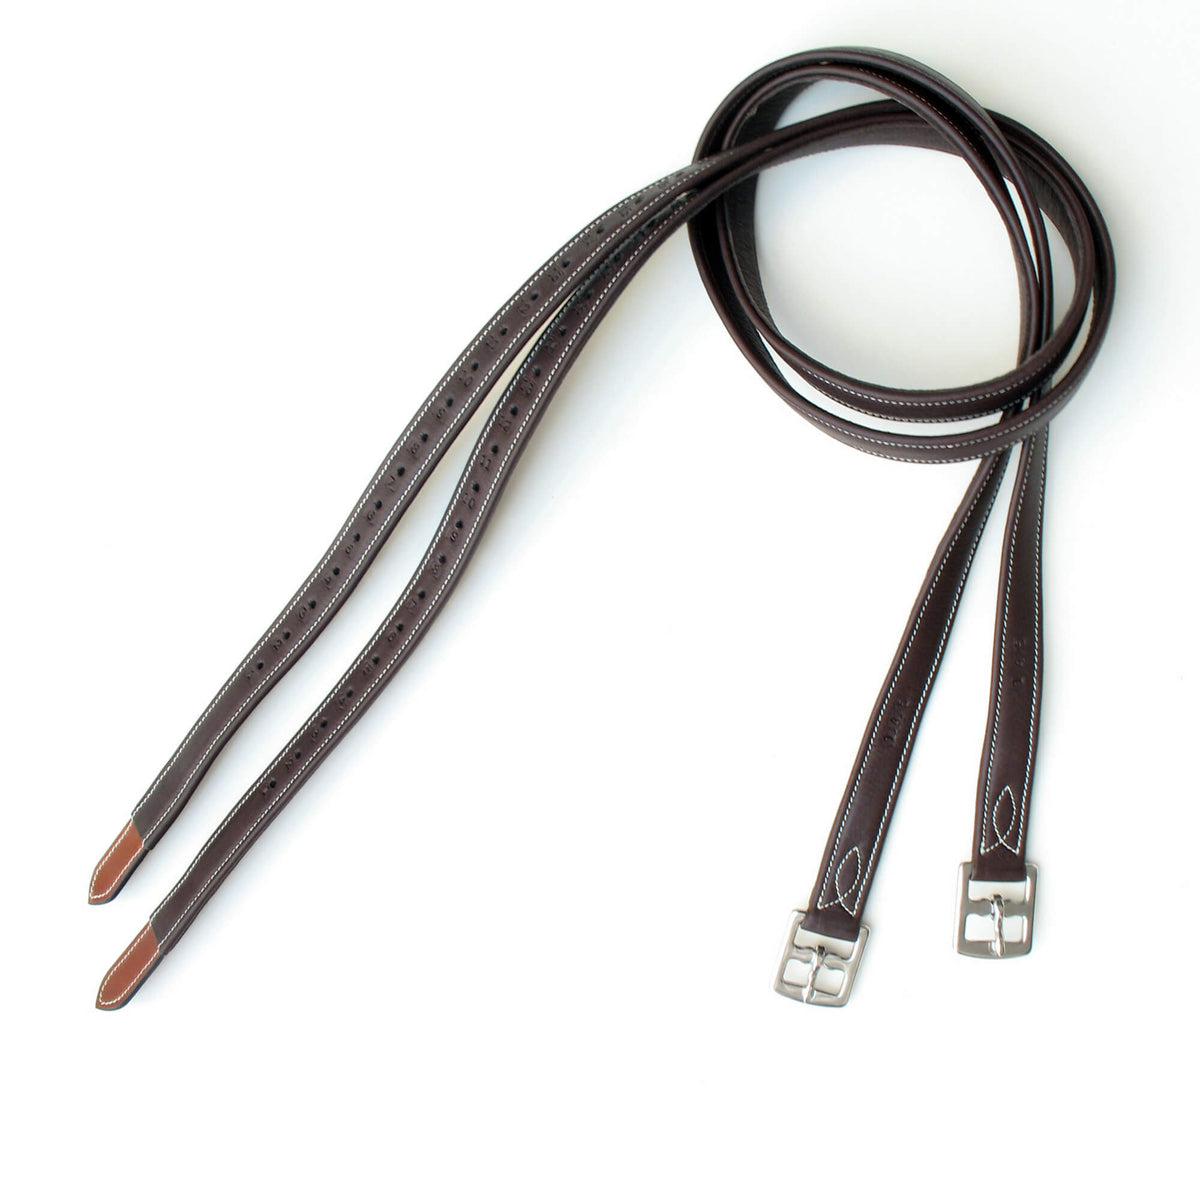 English Leather Horse Stirrups & Leather- Bridles & Reins